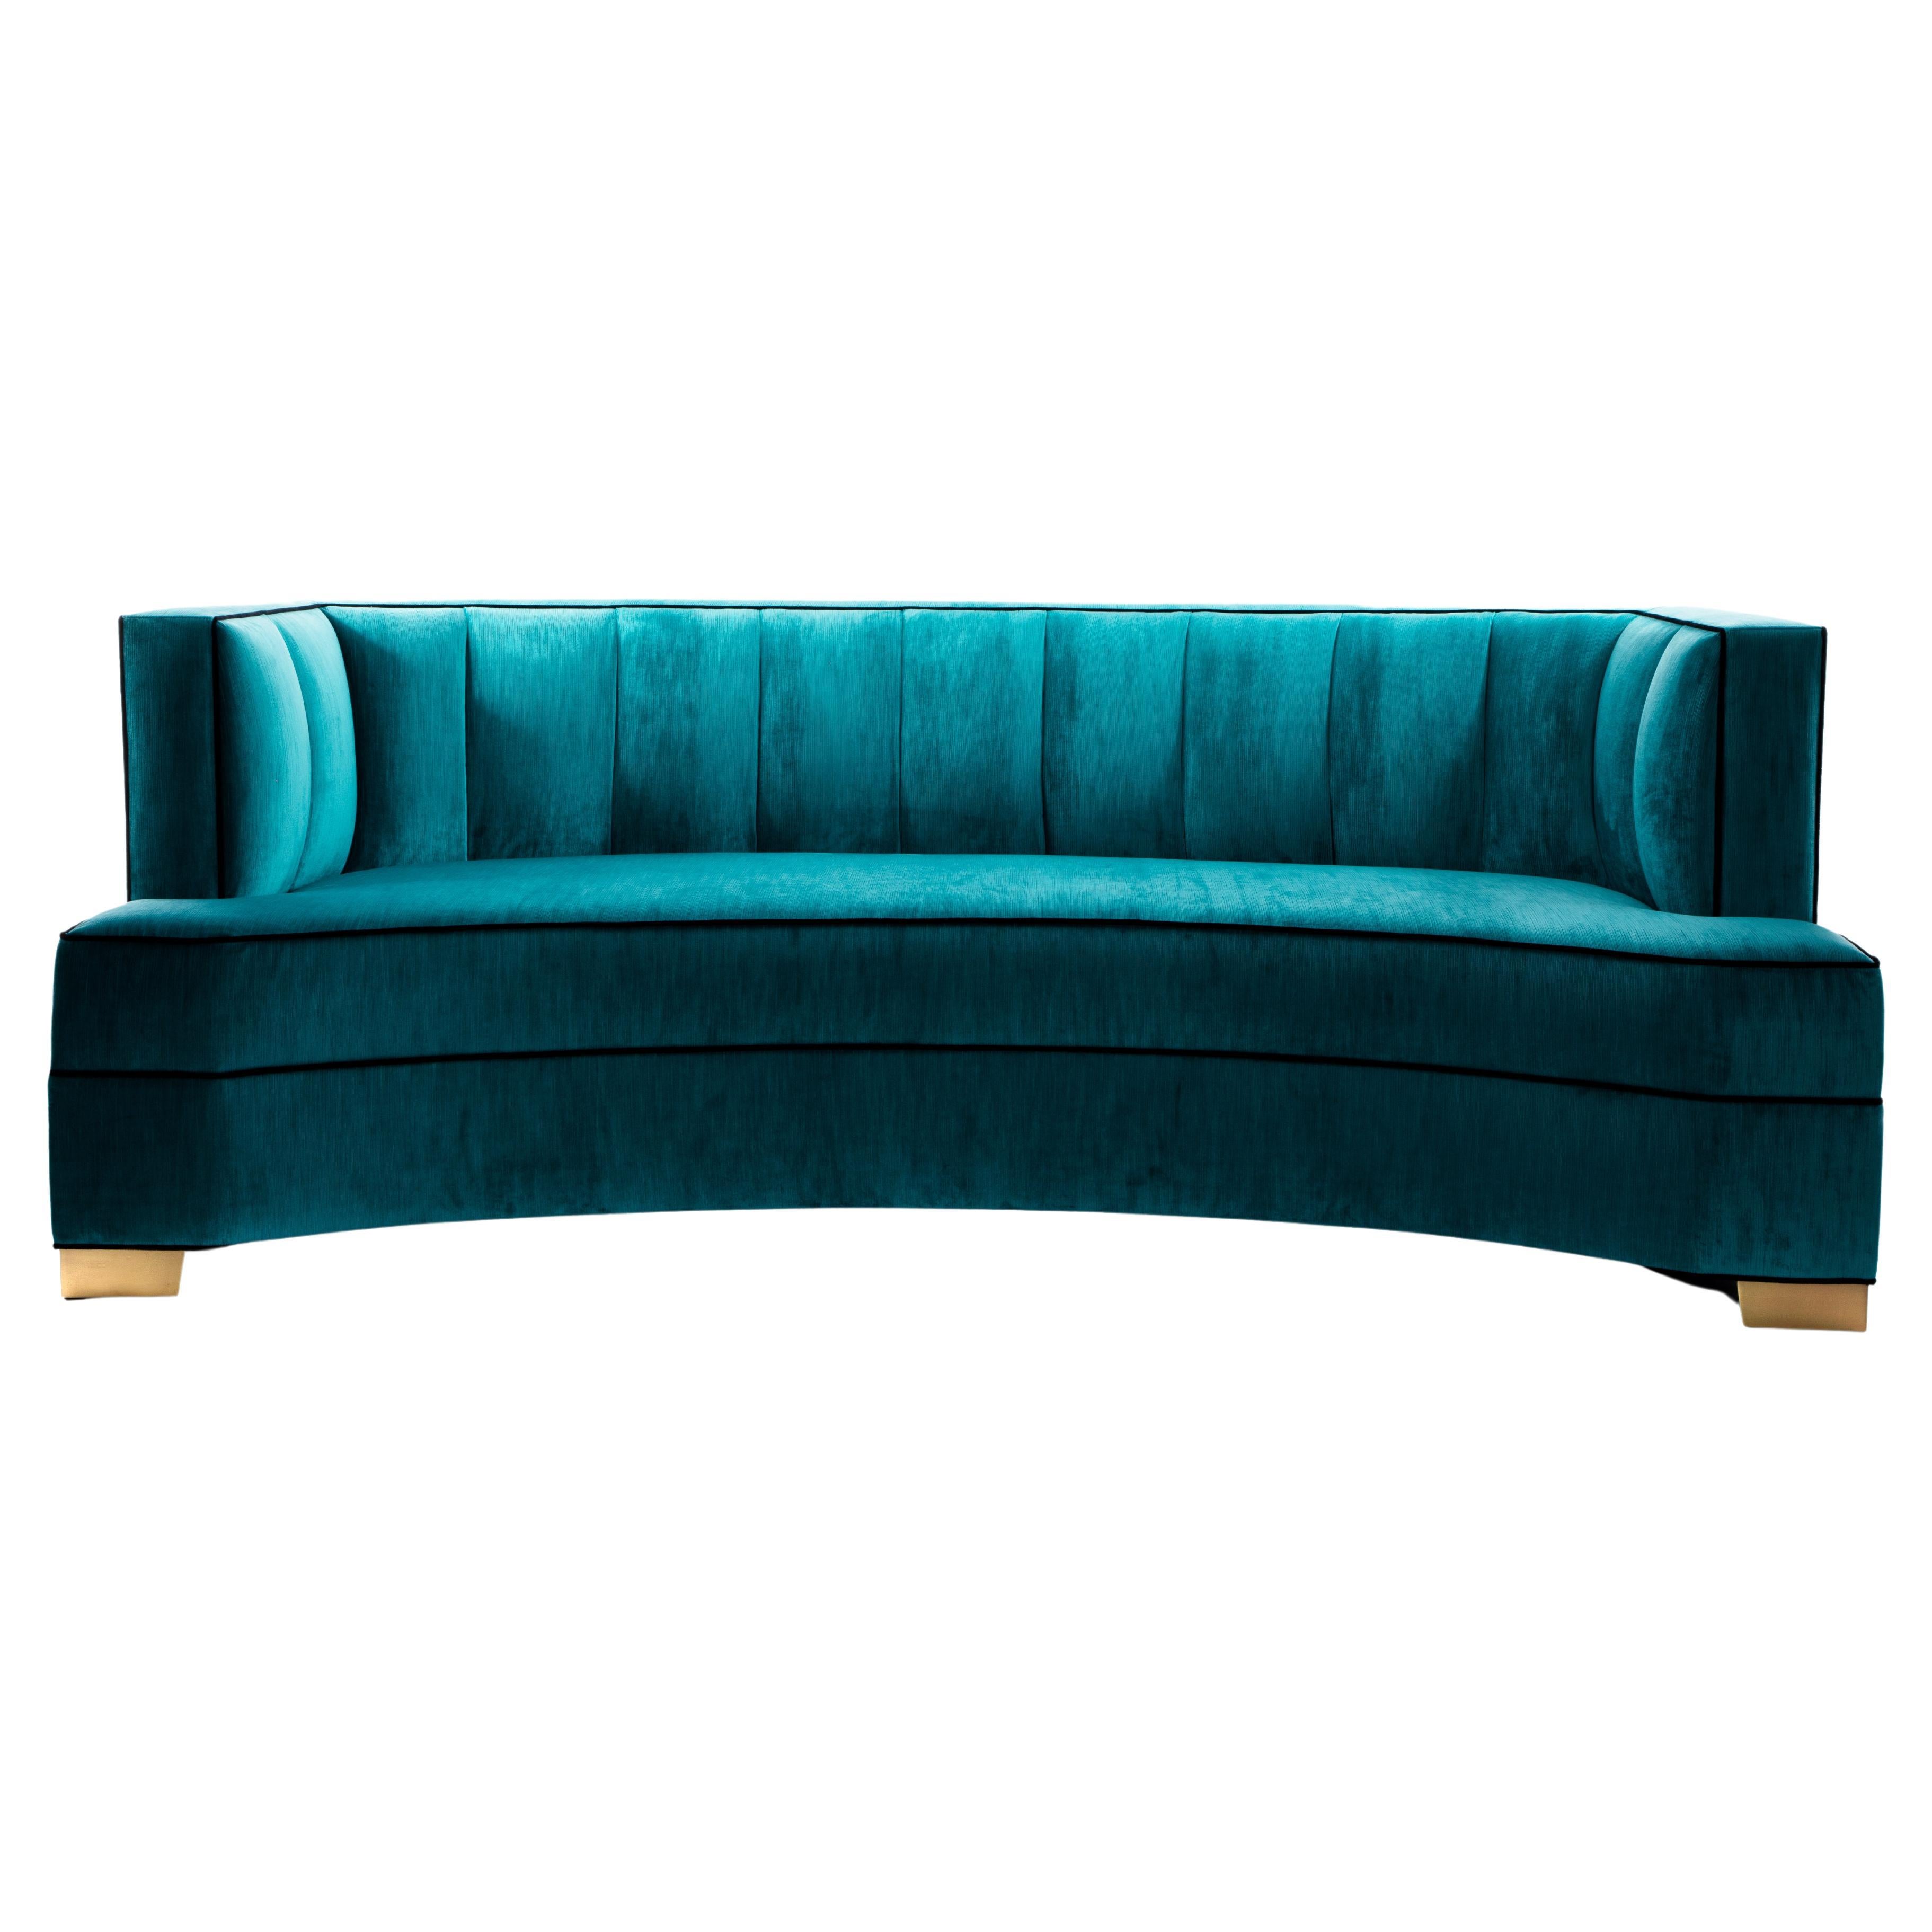 Meet Alessandra, the definition of old Hollywood glamour. From rounded back to channel-tufting, her curves embrace as you relax on her stunning frame. Whether clothed in velvet, wool or mohair, this sleek sofa adds refinement and class to any